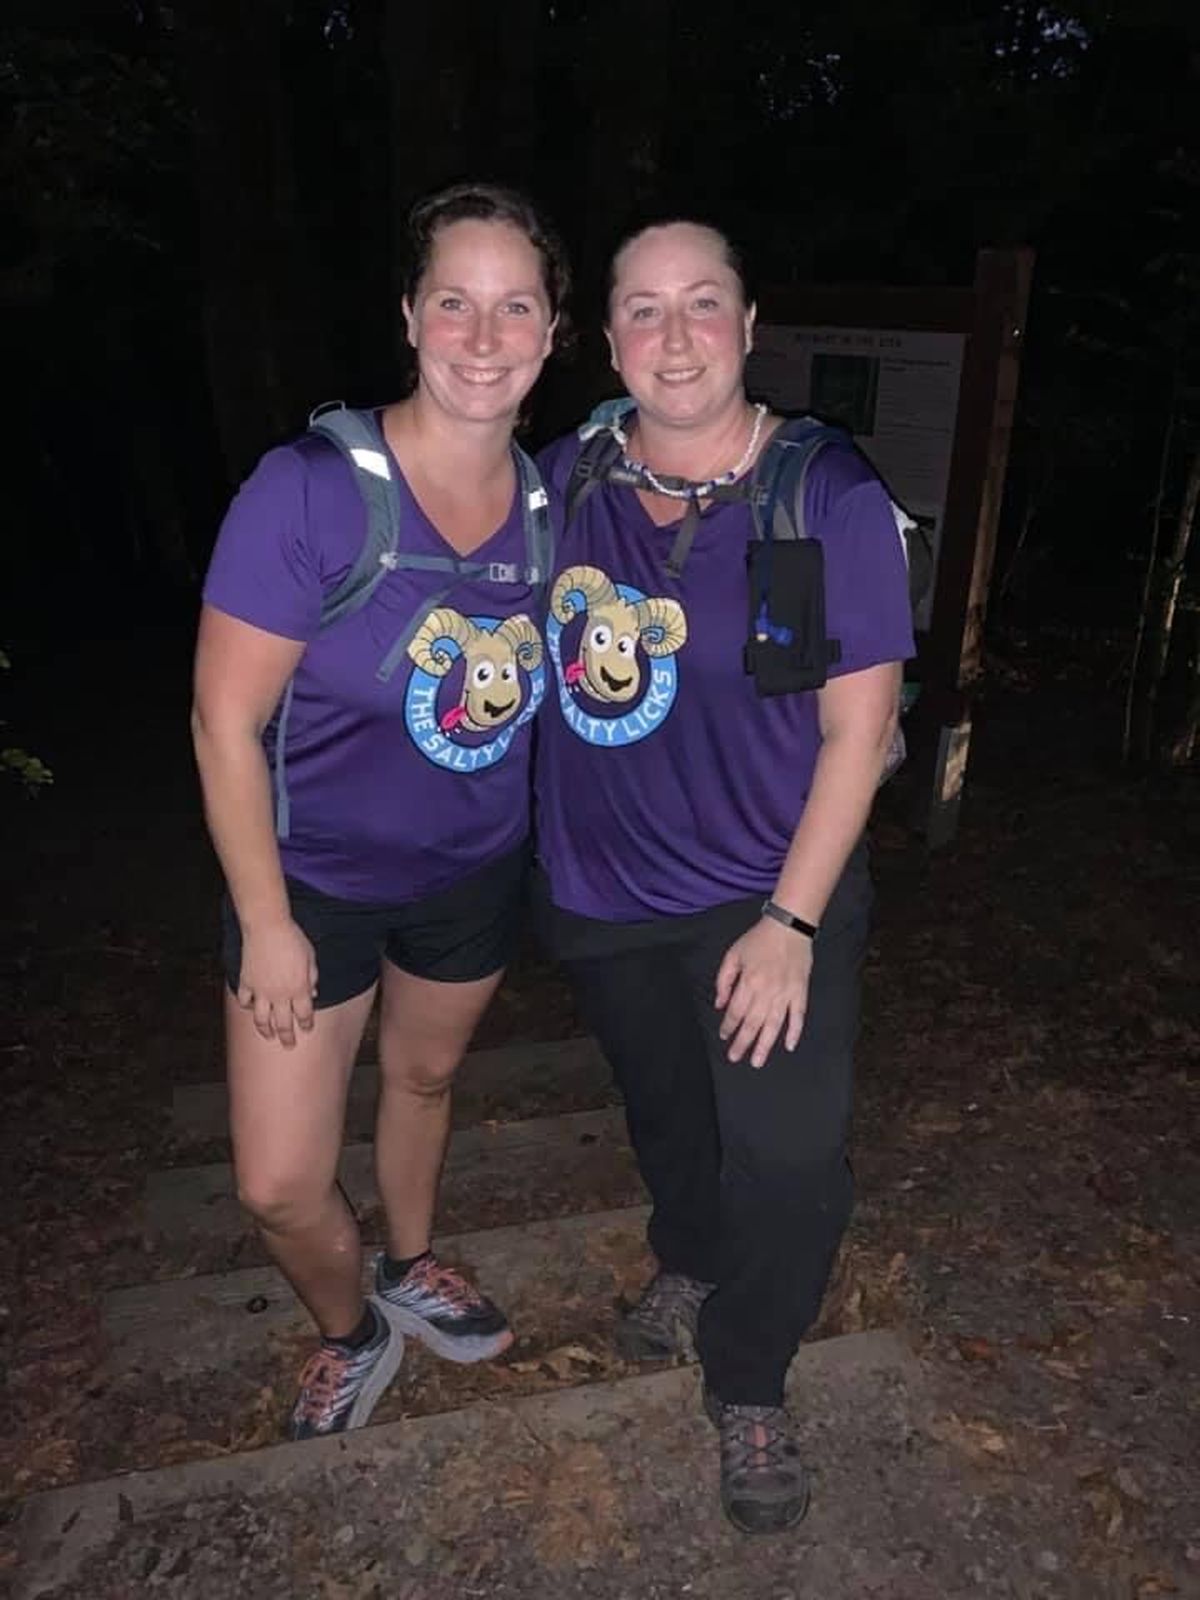 Amanda Nelson and her sister, Nicole Jonak, share a moment on a 31-mile benefit hike Oct. 3 to support cystic fibrosis research and in memory of their sister Krista Baker, who died at age 20 from the disease while awaiting a double lung transplant.  (Courtesy)